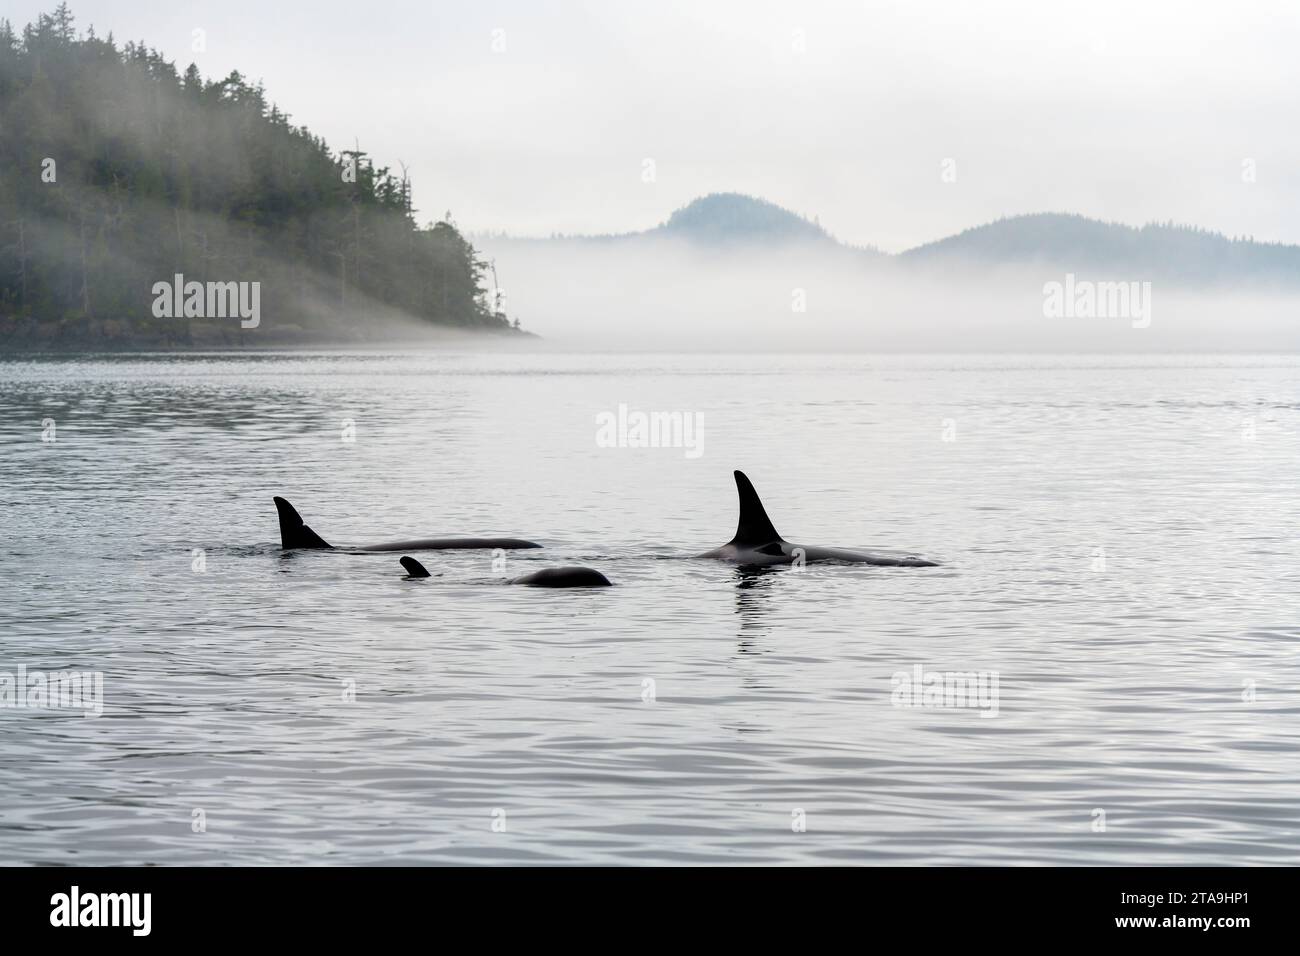 Three Orca (Orcinus orca) on whale watching tour, Telegraph Cove, Vancouver Island, British Columbia, Canada. Stock Photo